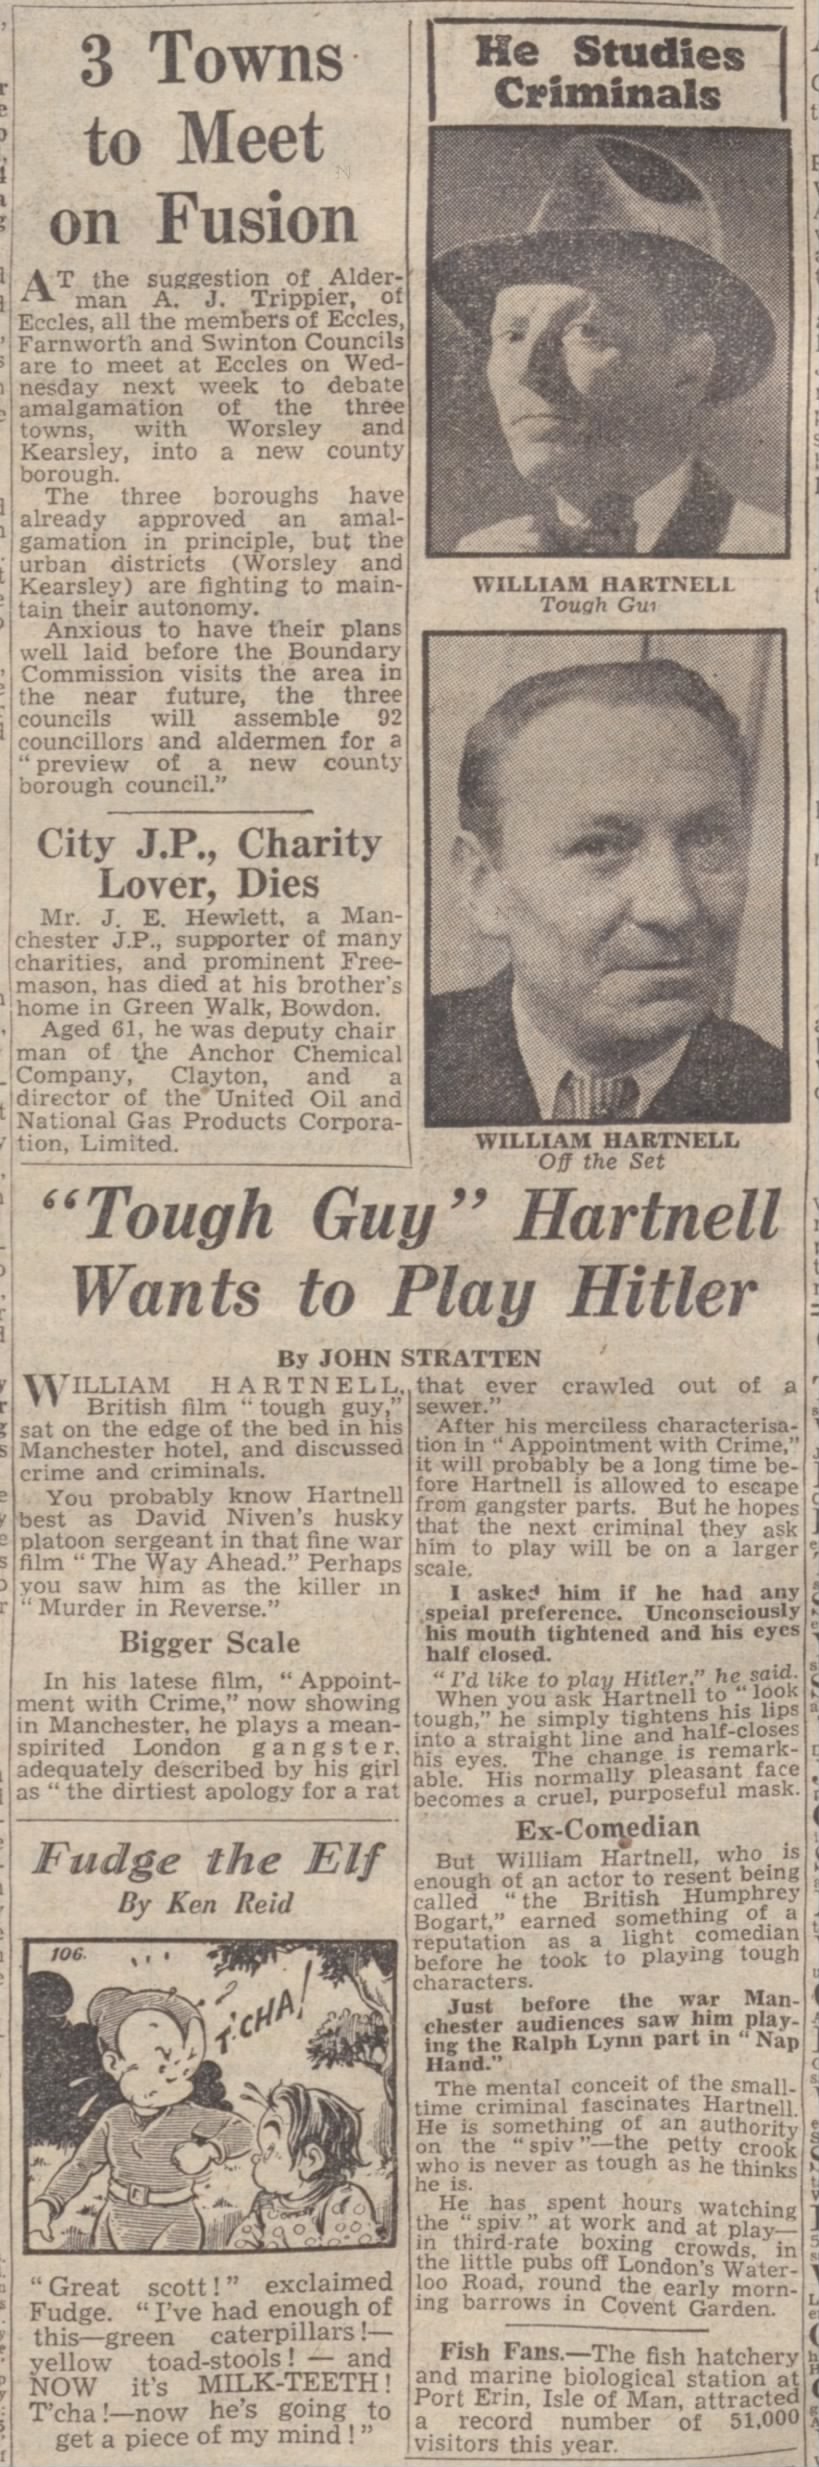 "Tough Guy" Hartnell Wants to Play Hitler